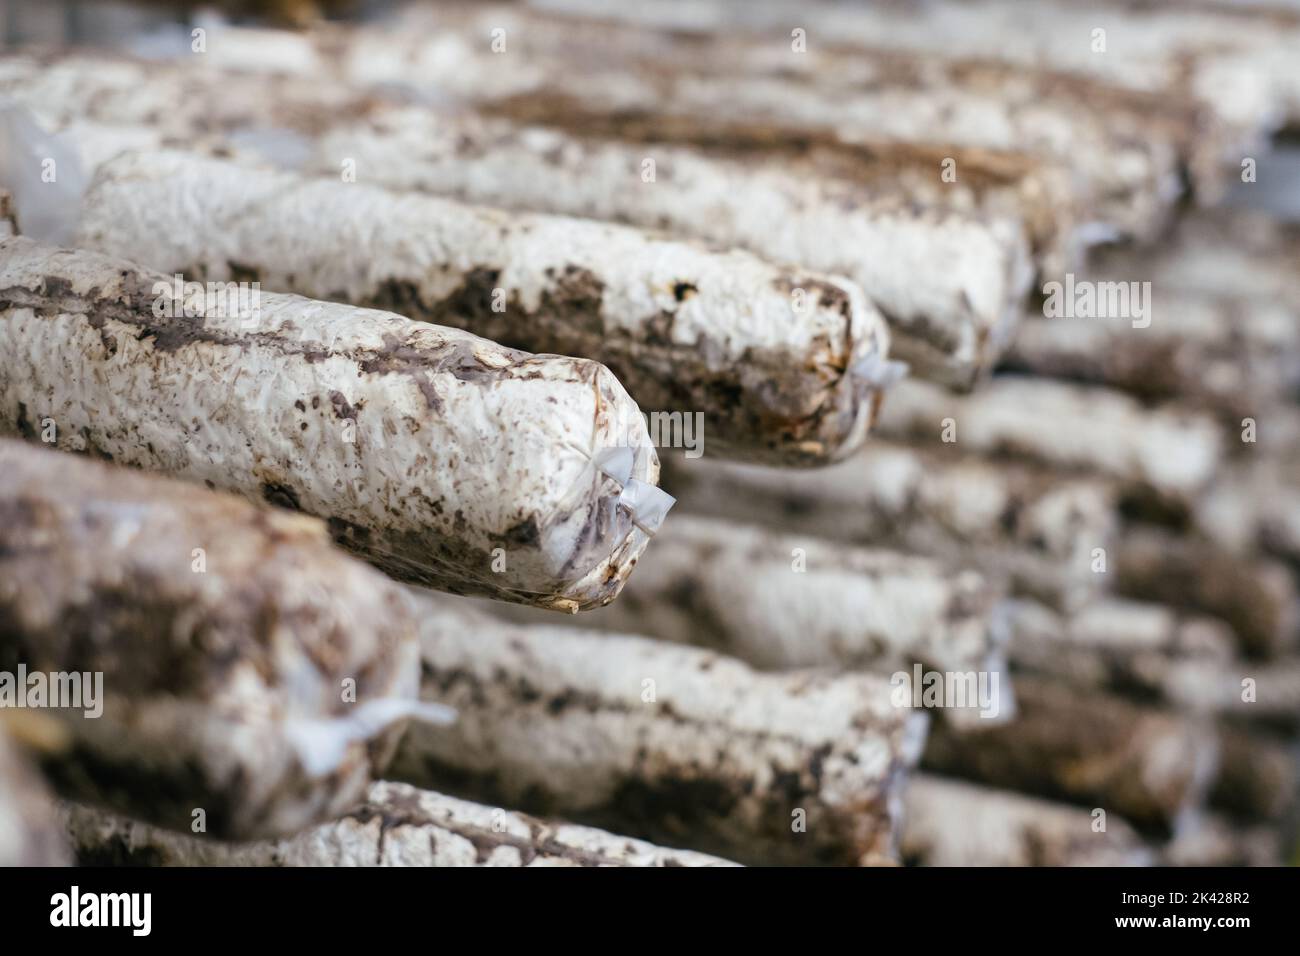 Natural substrate packs for cultivating mushrooms in vertical mushroom farm. Stock Photo